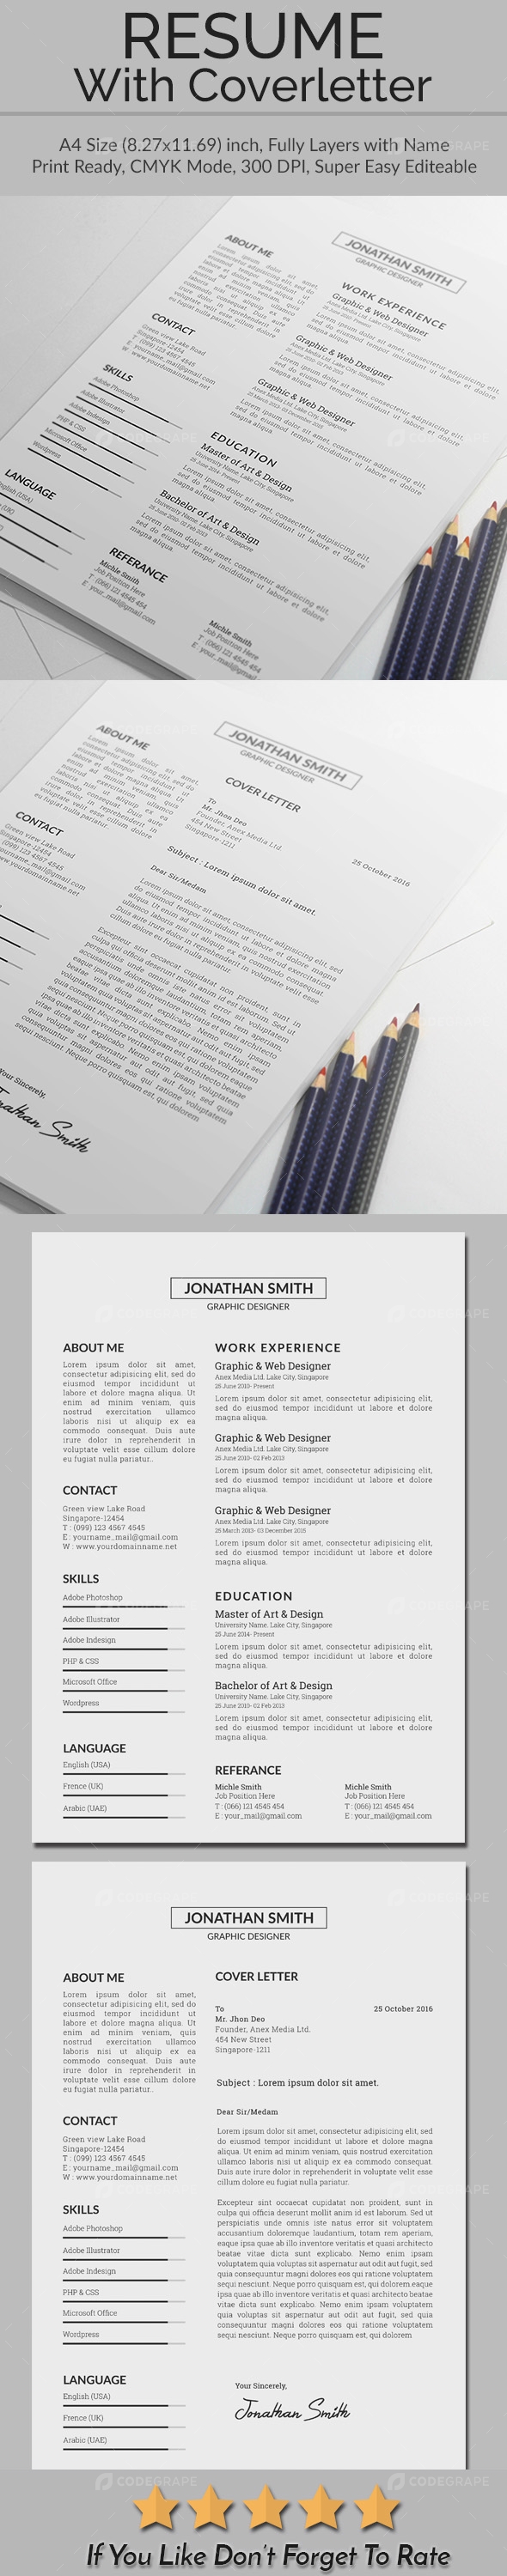 Resume/CV with Cover Letter